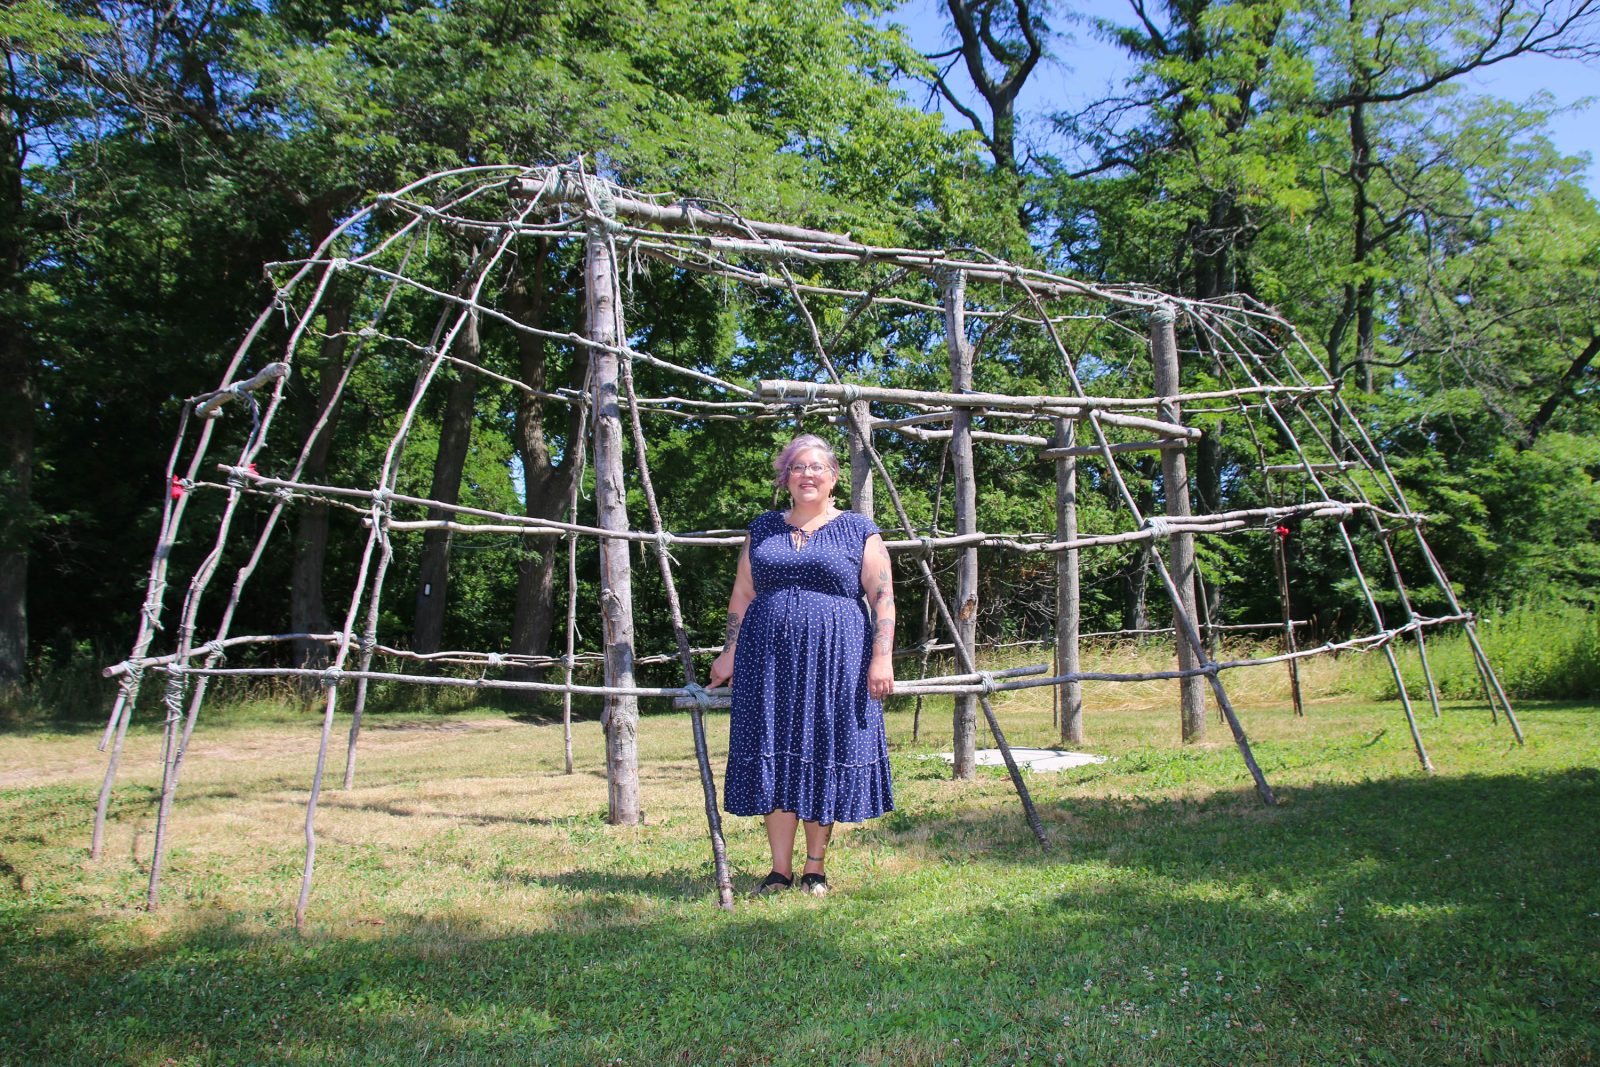 A woman in a blue dress stands in a field of grass in front of an oval-shaped building frame made from wooden branches.